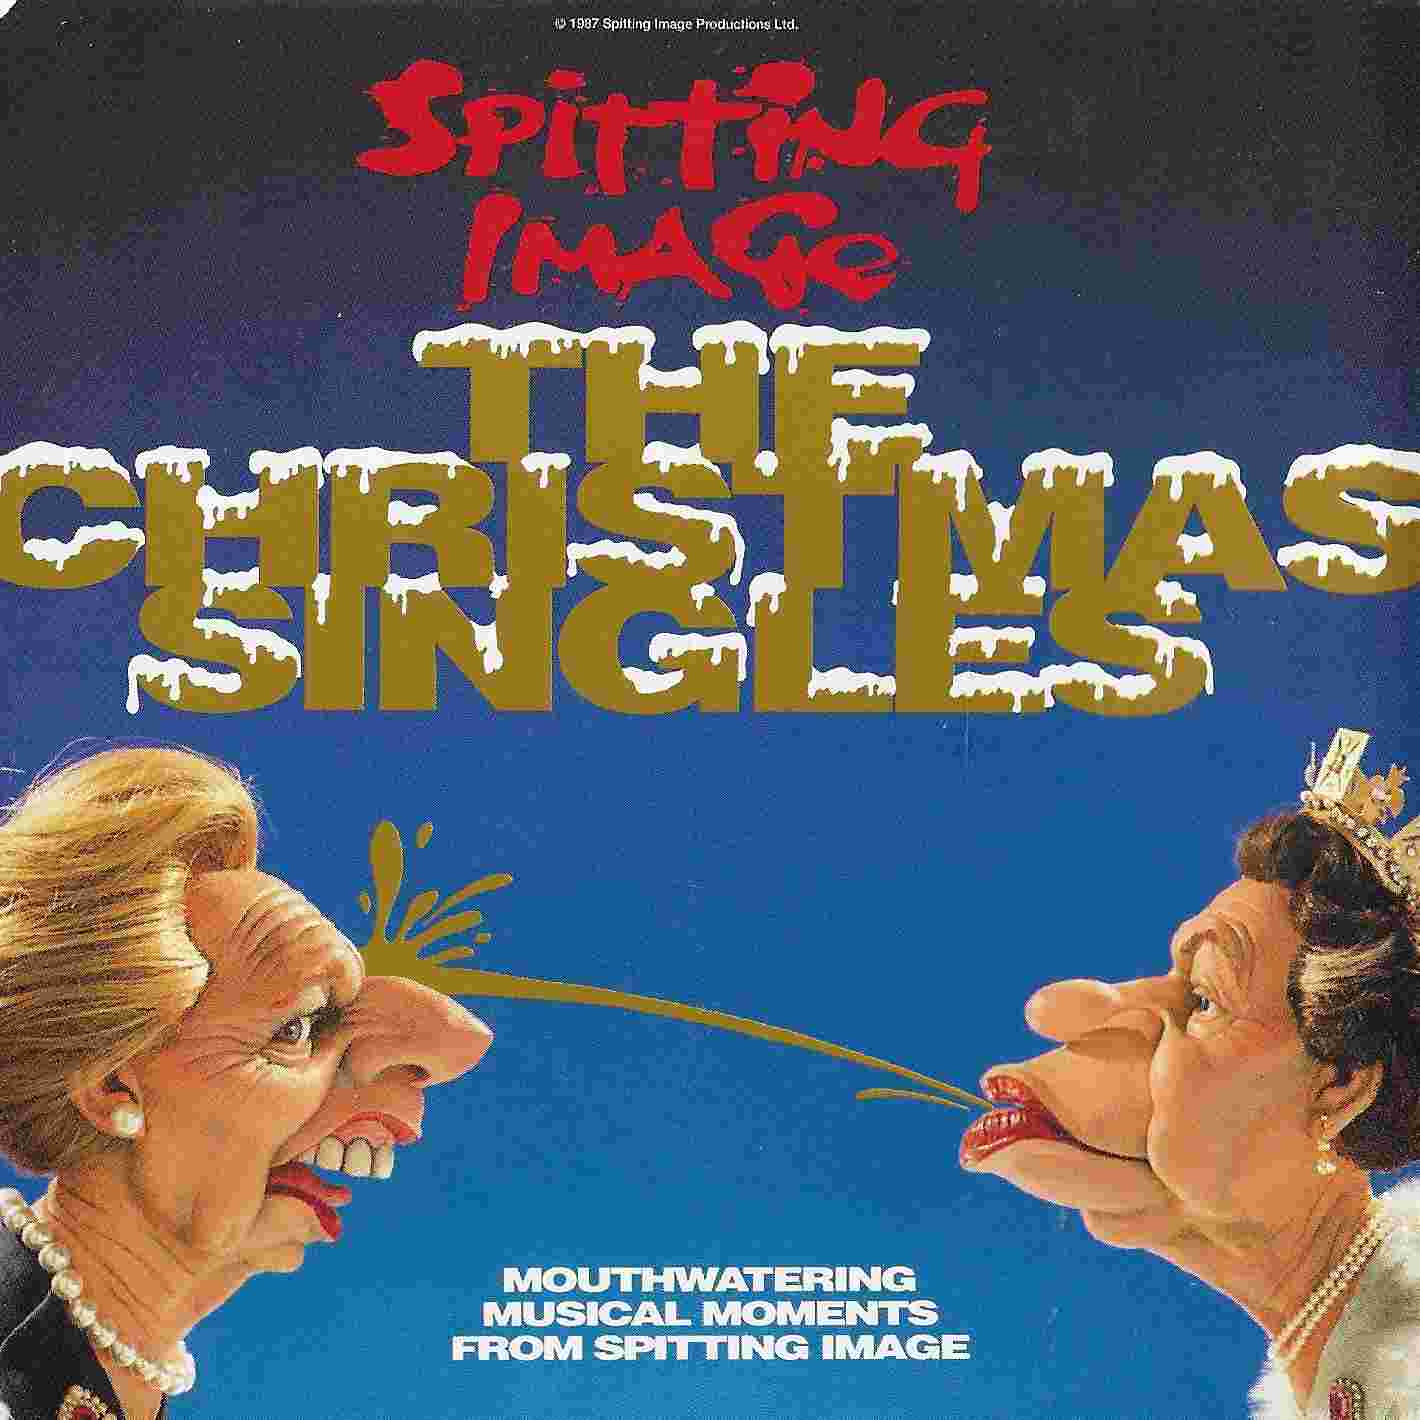 Picture of CD EM 166 The Christmas singles by artist Brown / Pope / Simpson from ITV, Channel 4 and Channel 5 cdsingles library